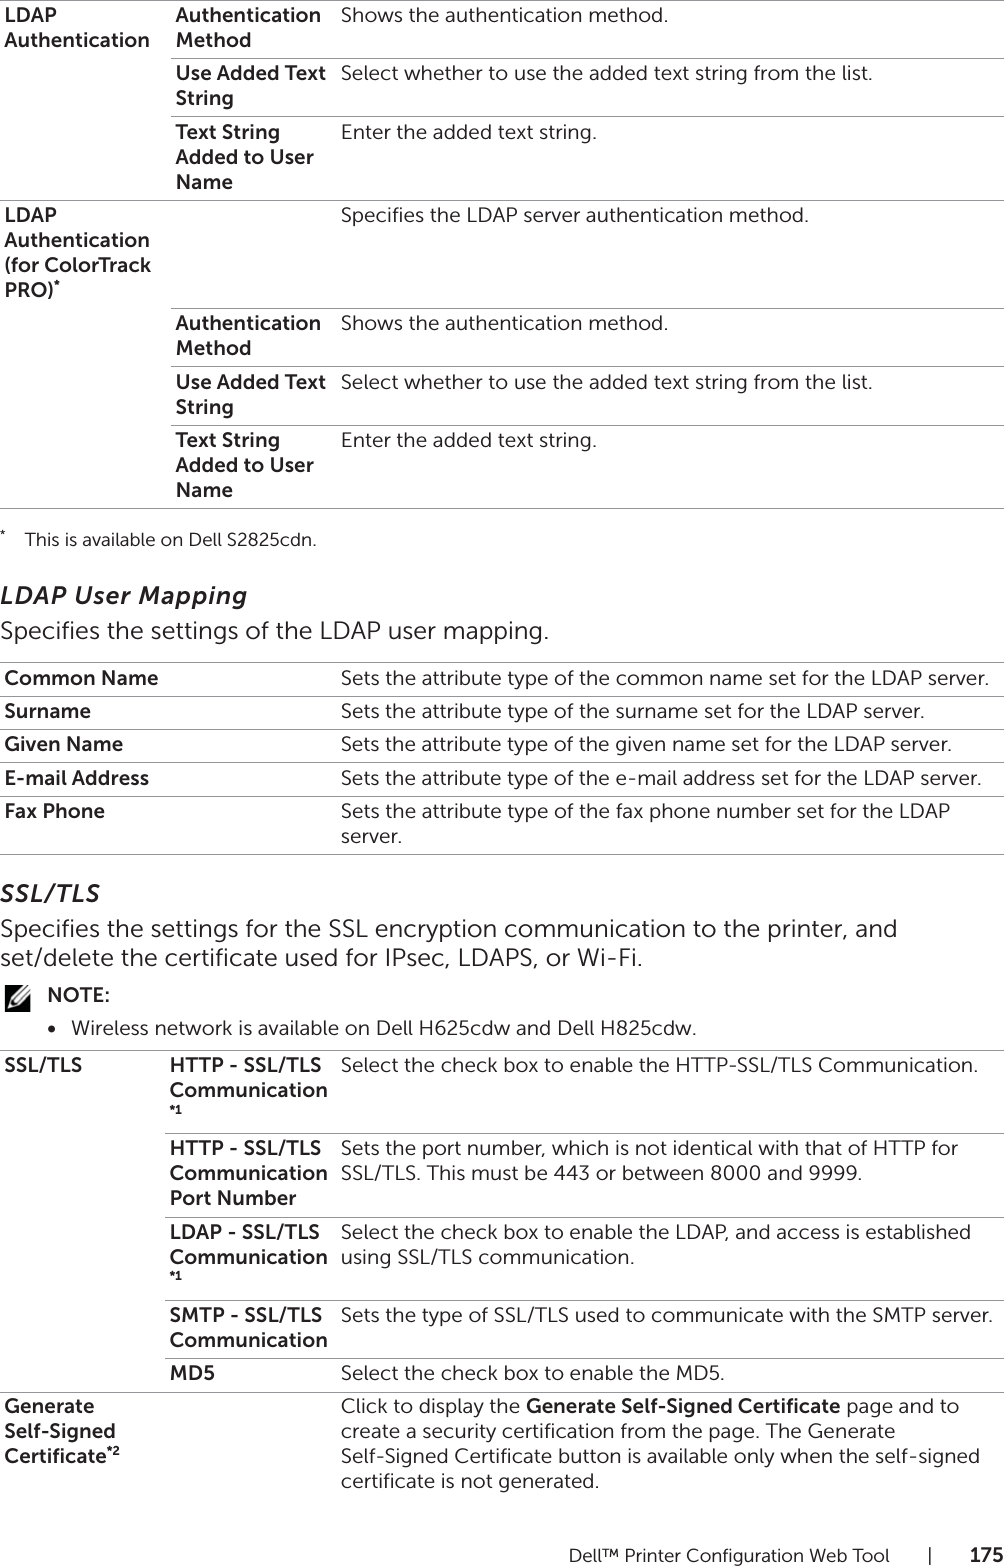 Dell™ Printer Configuration Web Tool |175*This is available on Dell S2825cdn.LDAP User MappingSpecifies the settings of the LDAP user mapping.SSL/TLSSpecifies the settings for the SSL encryption communication to the printer, and set/delete the certificate used for IPsec, LDAPS, or Wi-Fi.NOTE:•Wireless network is available on Dell H625cdw and Dell H825cdw.LDAP AuthenticationAuthentication MethodShows the authentication method.Use Added Text StringSelect whether to use the added text string from the list.Text String Added to User NameEnter the added text string.LDAP Authentication (for ColorTrack PRO)*Specifies the LDAP server authentication method.Authentication MethodShows the authentication method.Use Added Text StringSelect whether to use the added text string from the list.Text String Added to User NameEnter the added text string.Common Name Sets the attribute type of the common name set for the LDAP server.Surname Sets the attribute type of the surname set for the LDAP server.Given Name Sets the attribute type of the given name set for the LDAP server.E-mail Address Sets the attribute type of the e-mail address set for the LDAP server.Fax Phone Sets the attribute type of the fax phone number set for the LDAP server.SSL/TLS HTTP - SSL/TLS Communication*1Select the check box to enable the HTTP-SSL/TLS Communication.HTTP - SSL/TLS Communication Port NumberSets the port number, which is not identical with that of HTTP for SSL/TLS. This must be 443 or between 8000 and 9999.LDAP - SSL/TLS Communication*1Select the check box to enable the LDAP, and access is established using SSL/TLS communication.SMTP - SSL/TLS CommunicationSets the type of SSL/TLS used to communicate with the SMTP server.MD5 Select the check box to enable the MD5.Generate Self-Signed Certificate*2Click to display the Generate Self-Signed Certificate page and to create a security certification from the page. The Generate Self-Signed Certificate button is available only when the self-signed certificate is not generated.